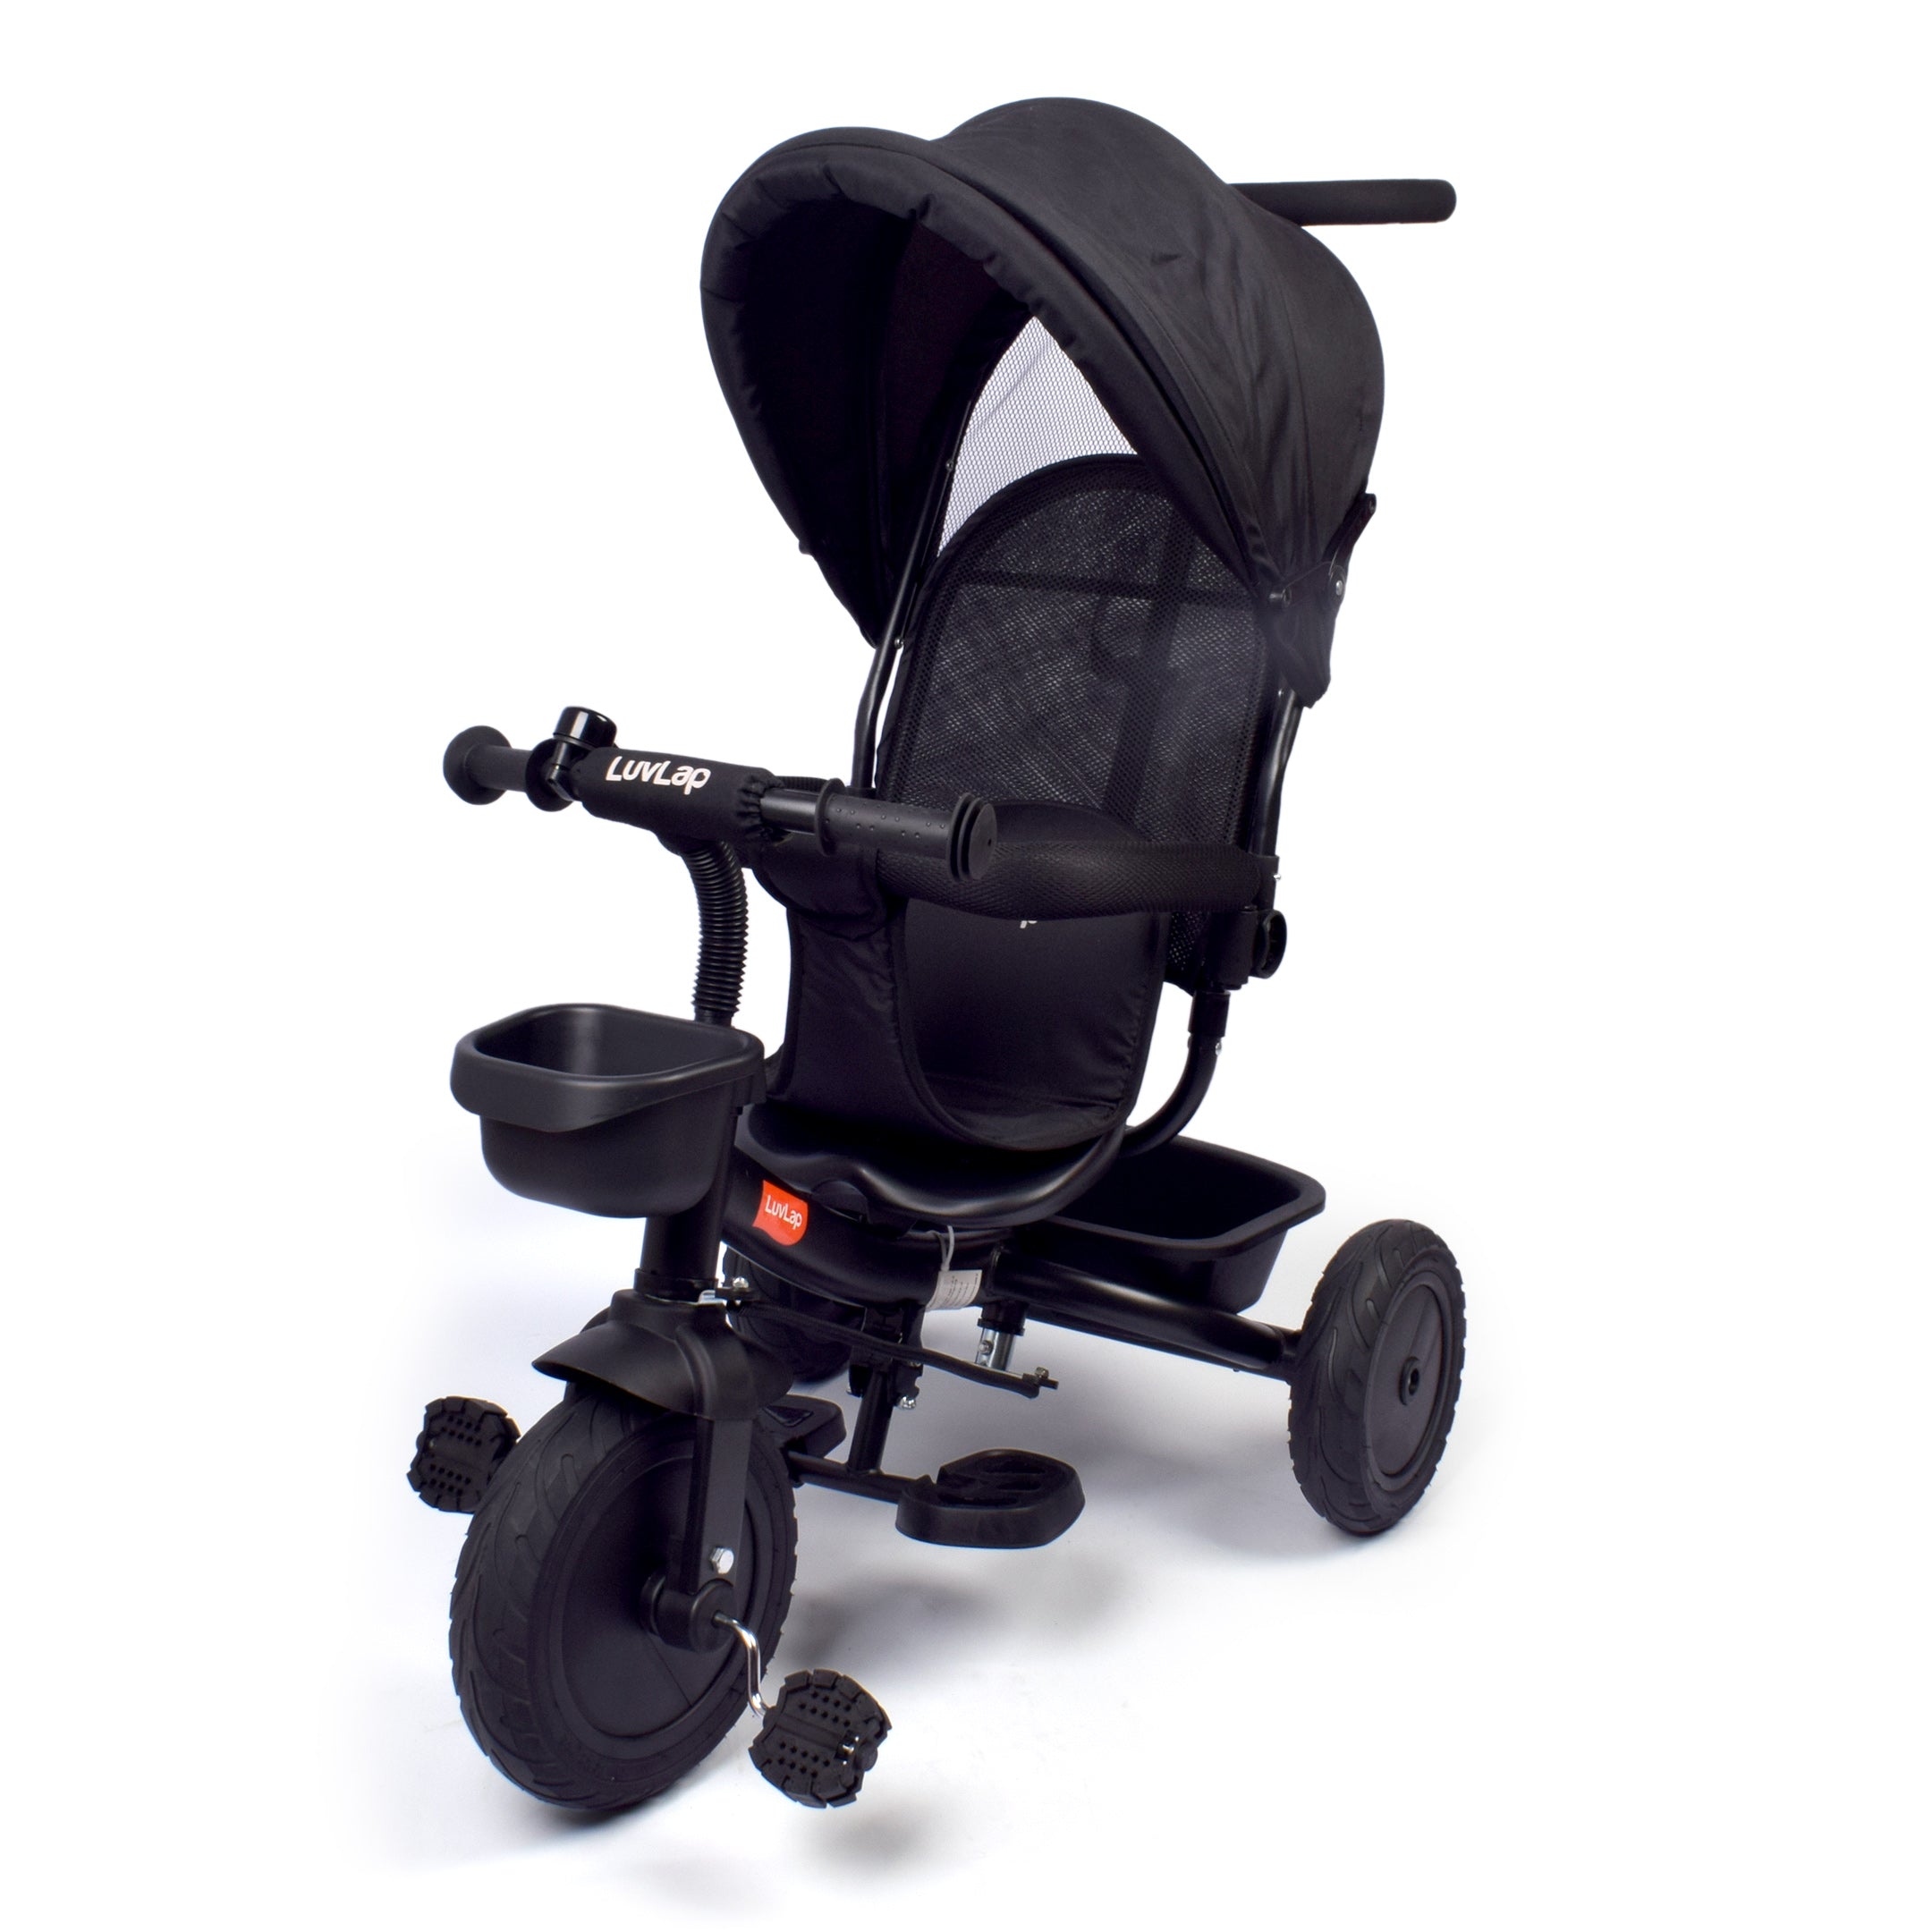 2 In 1 Kids Tricycle With Canopy and Push Bar - Black